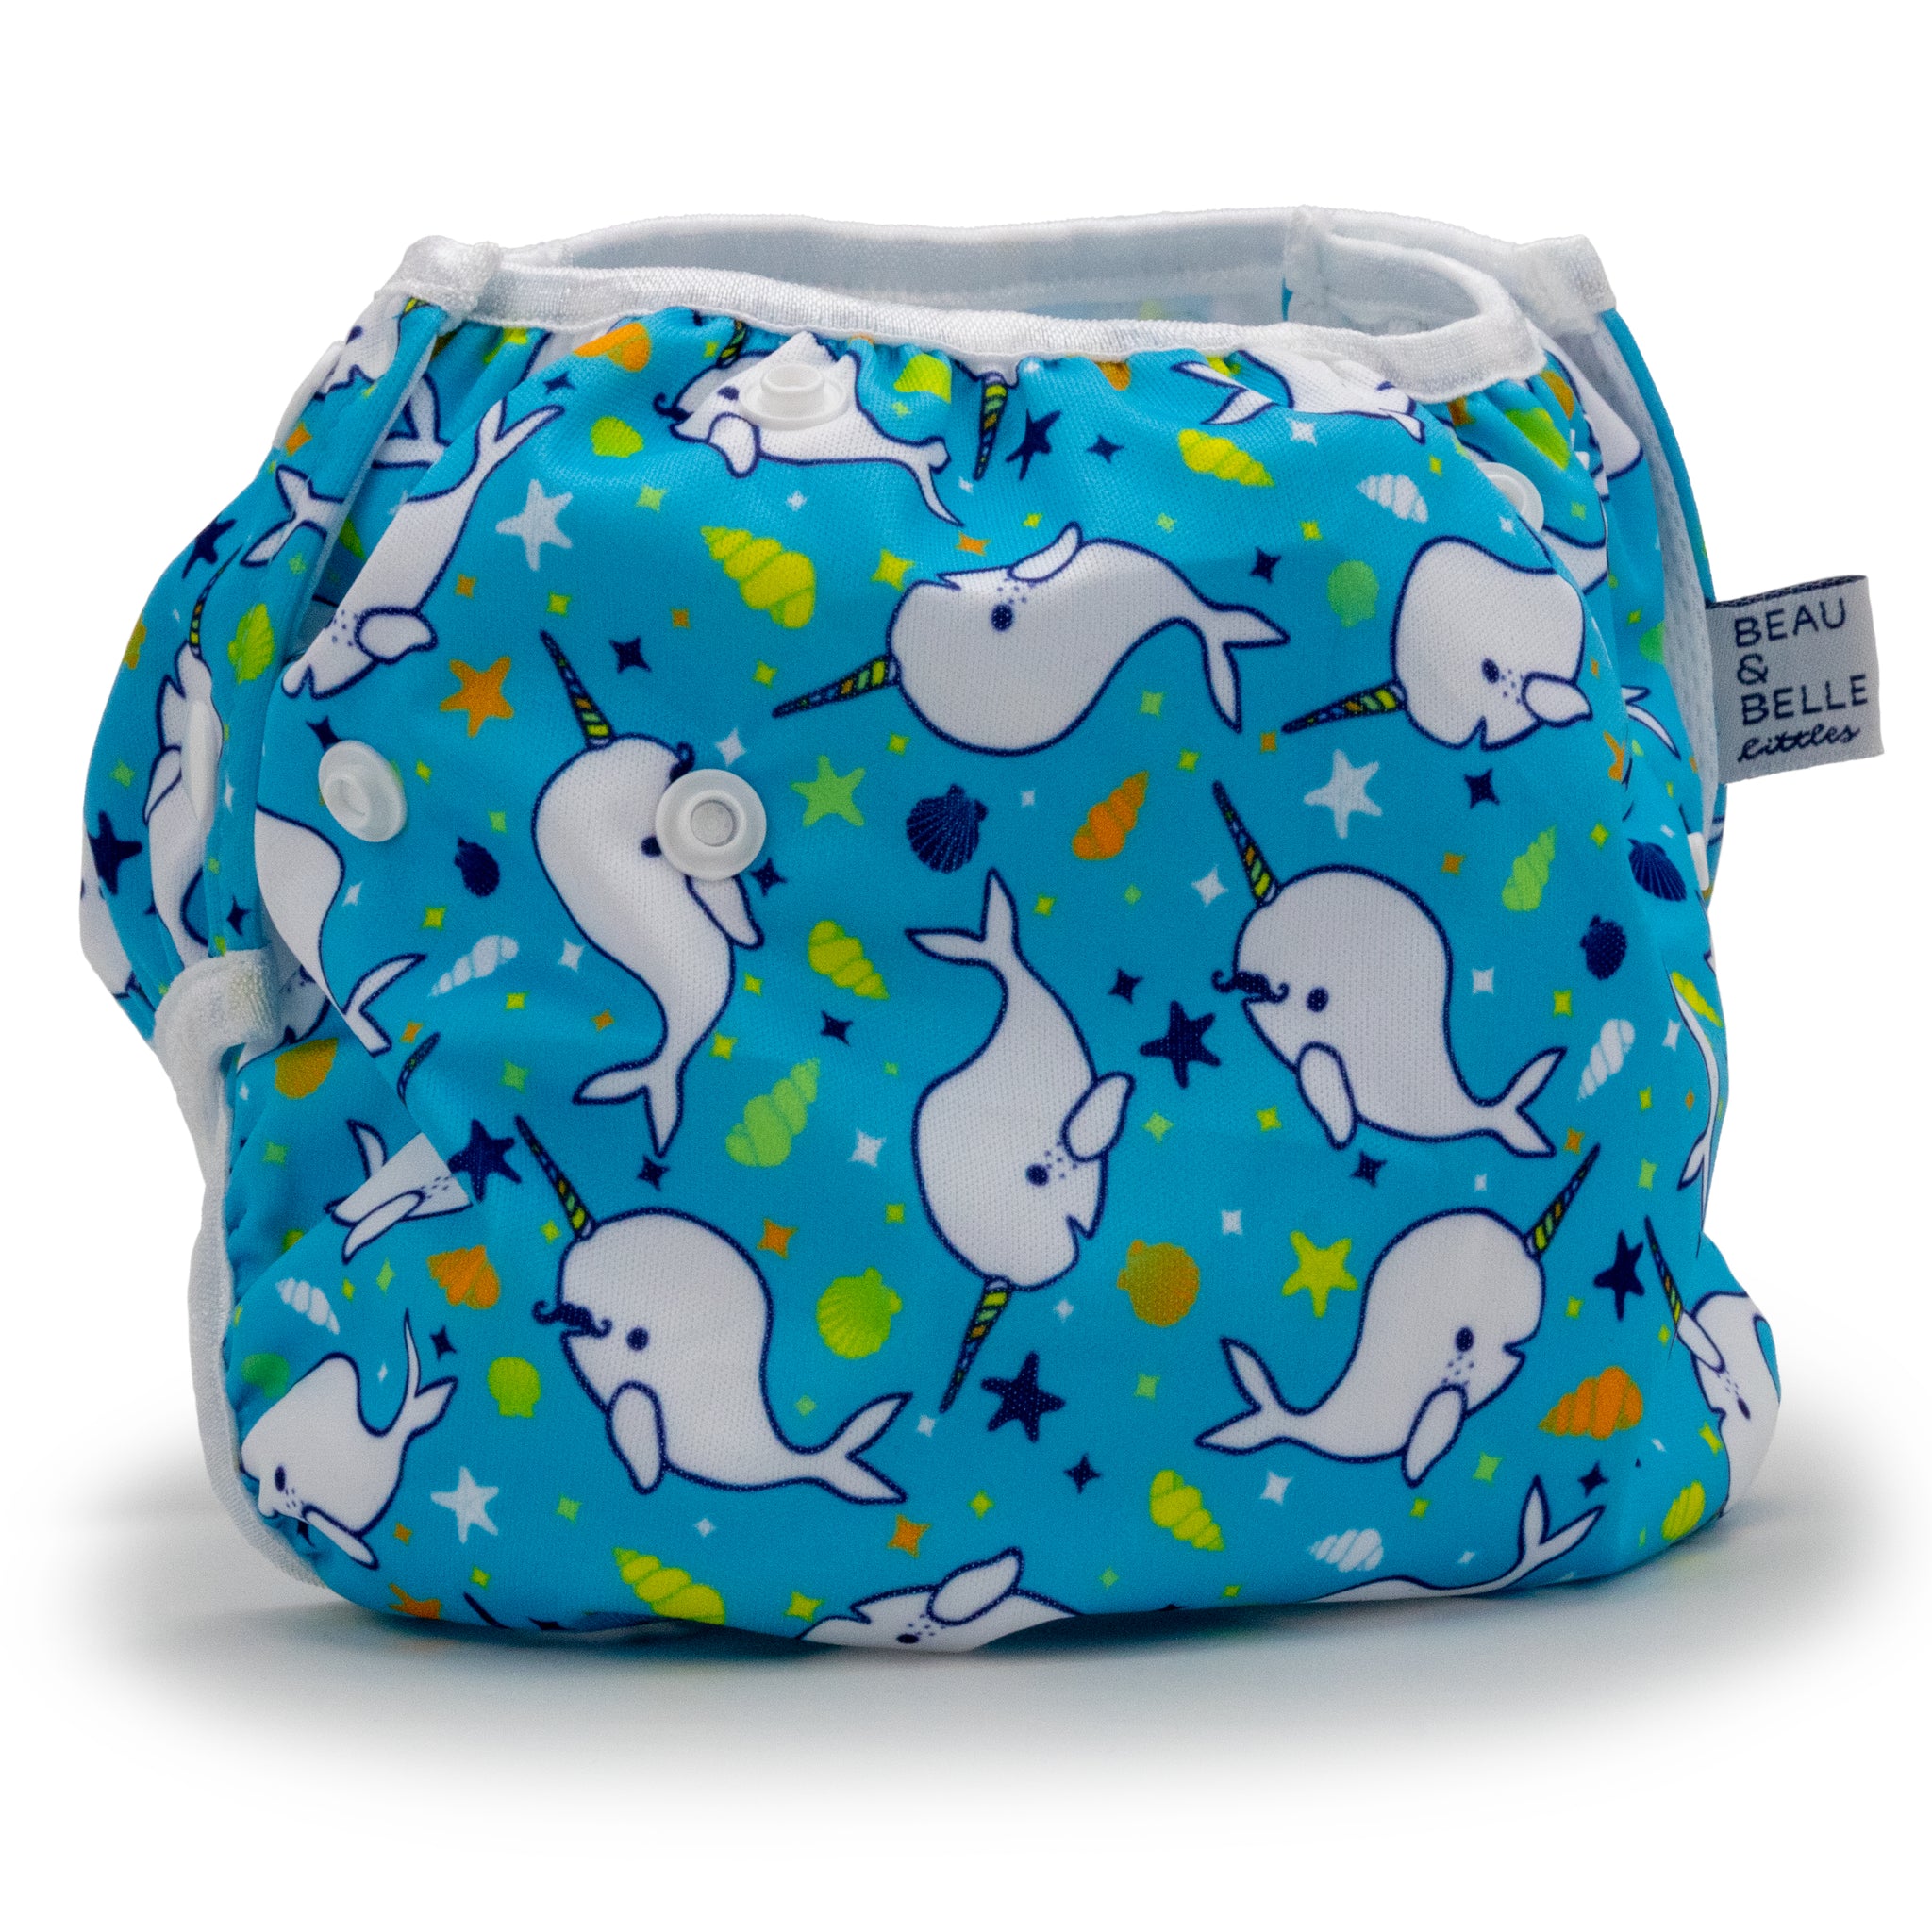 Reusable swim diaper with blue narhwal design, rear view, large size.